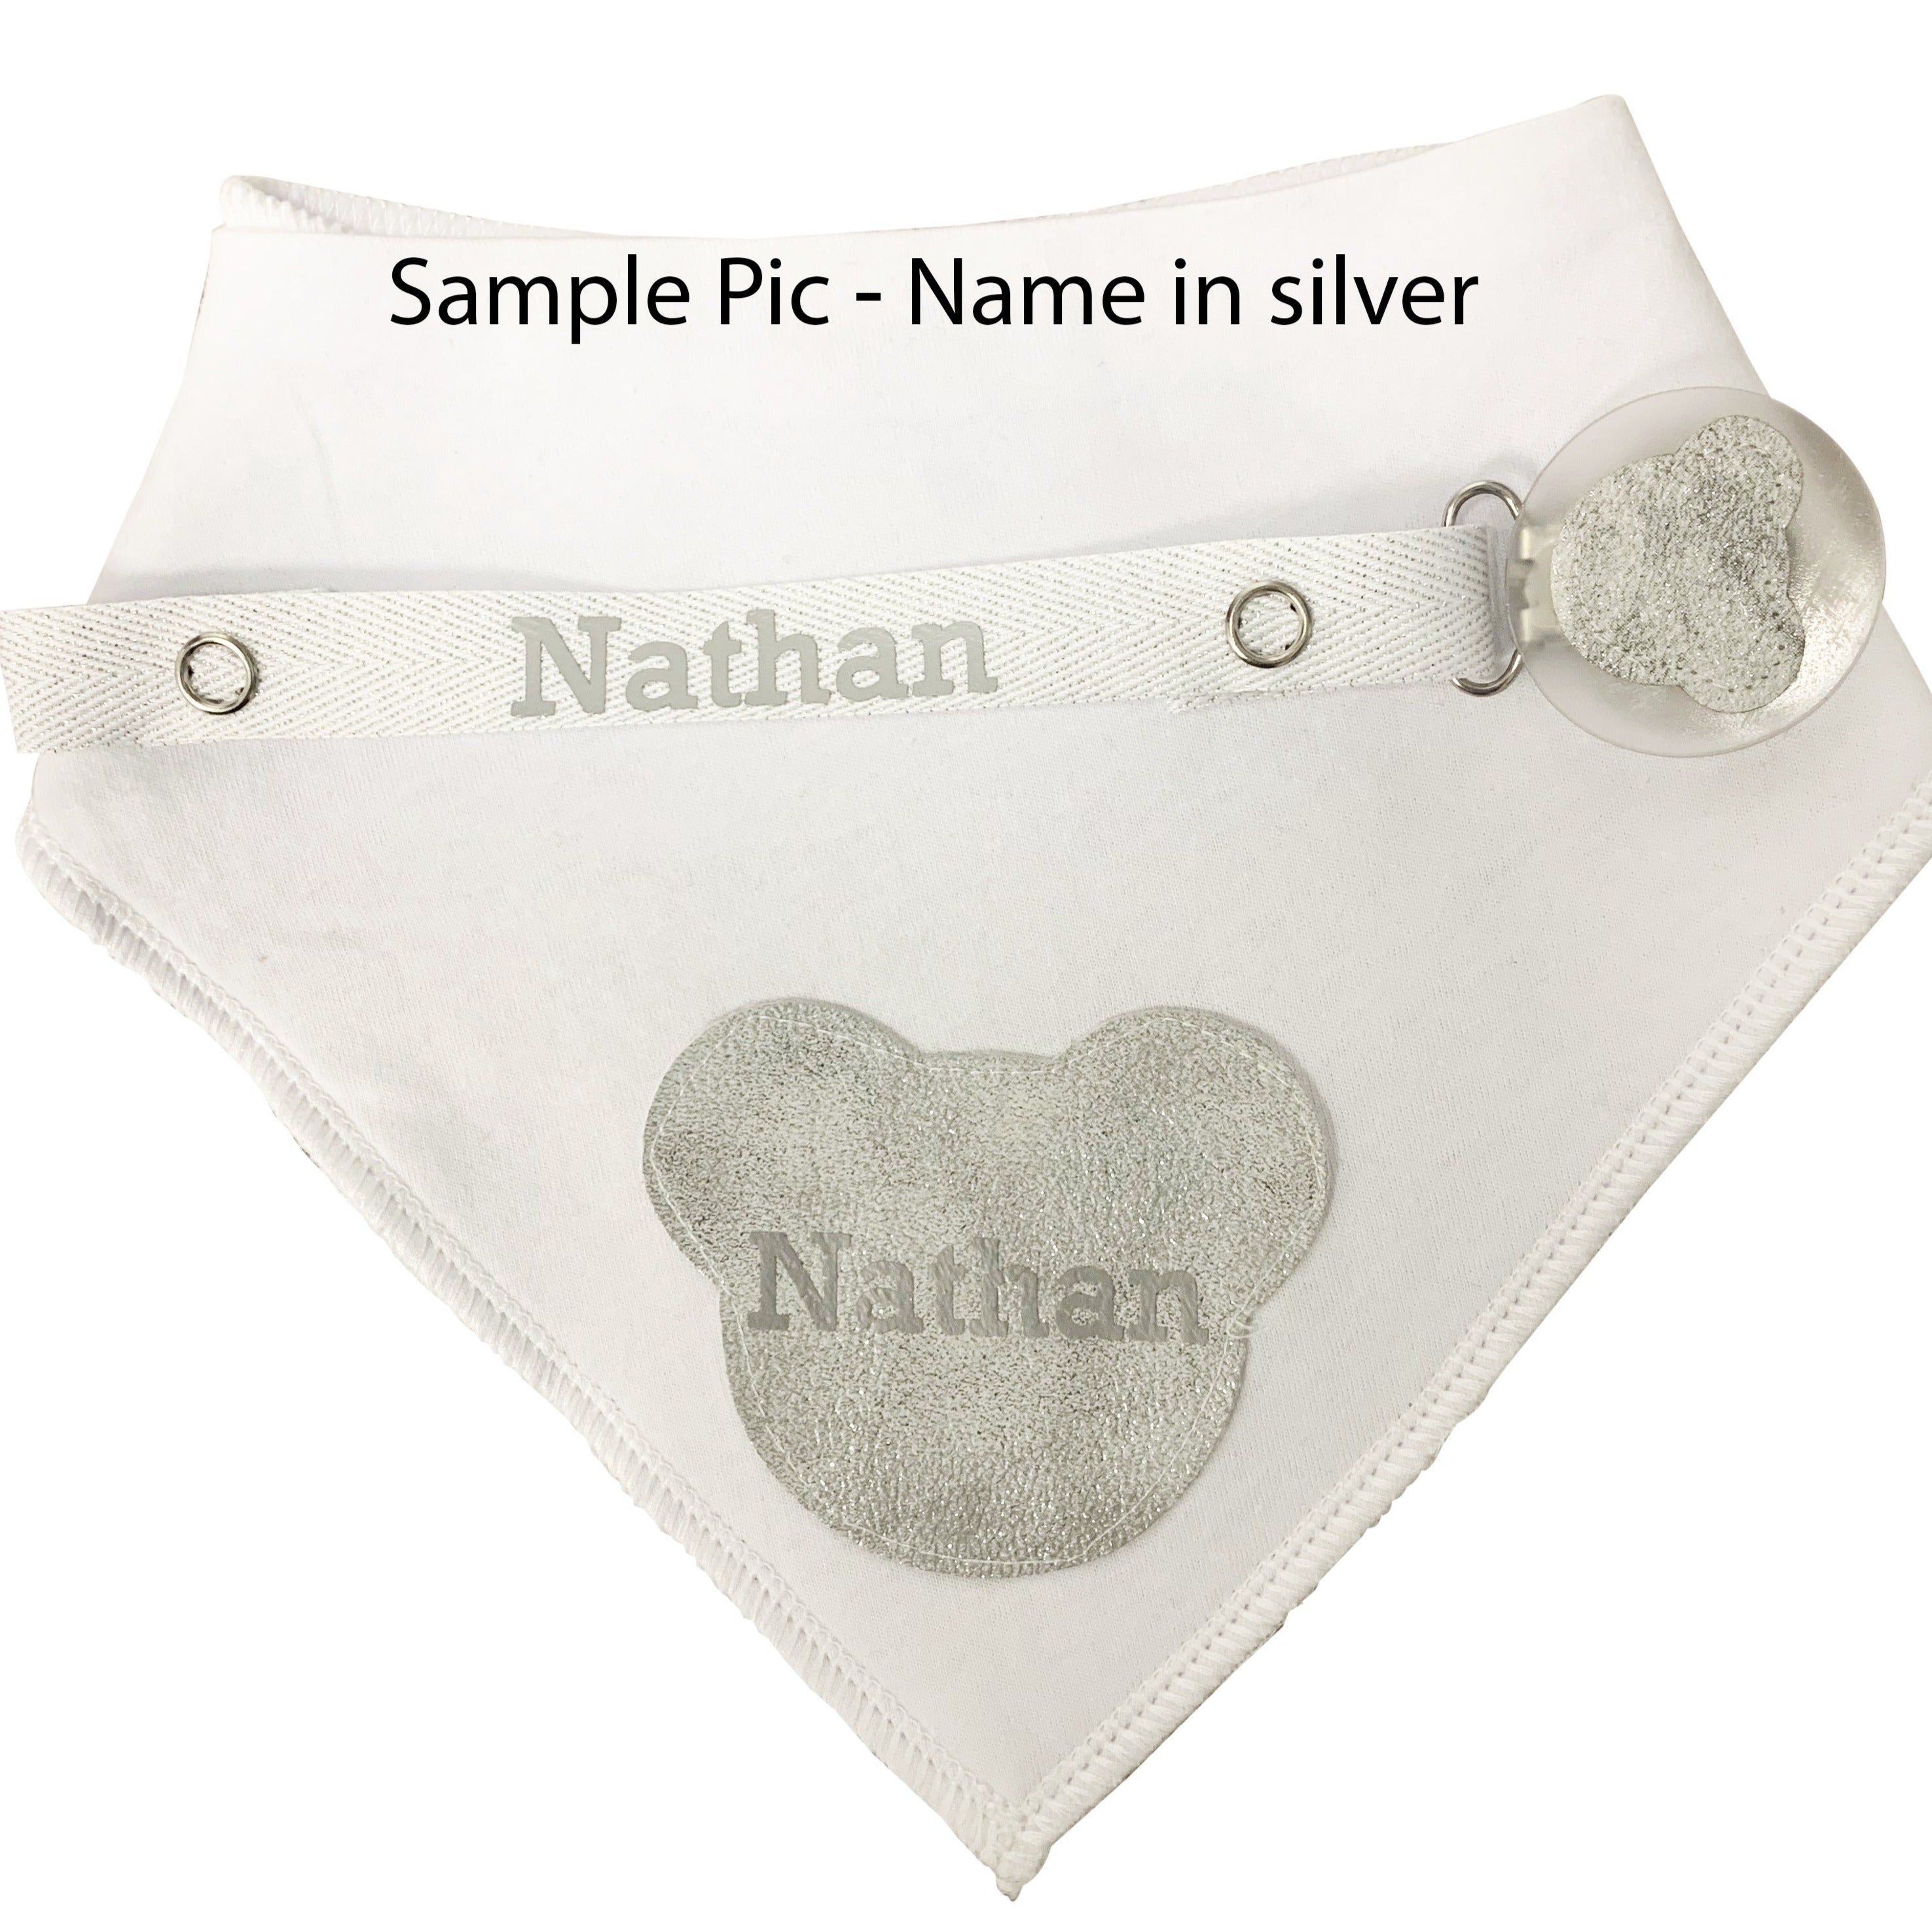 Silver Metallic Sparkle  leather Teddy bib and clip GIFT SET